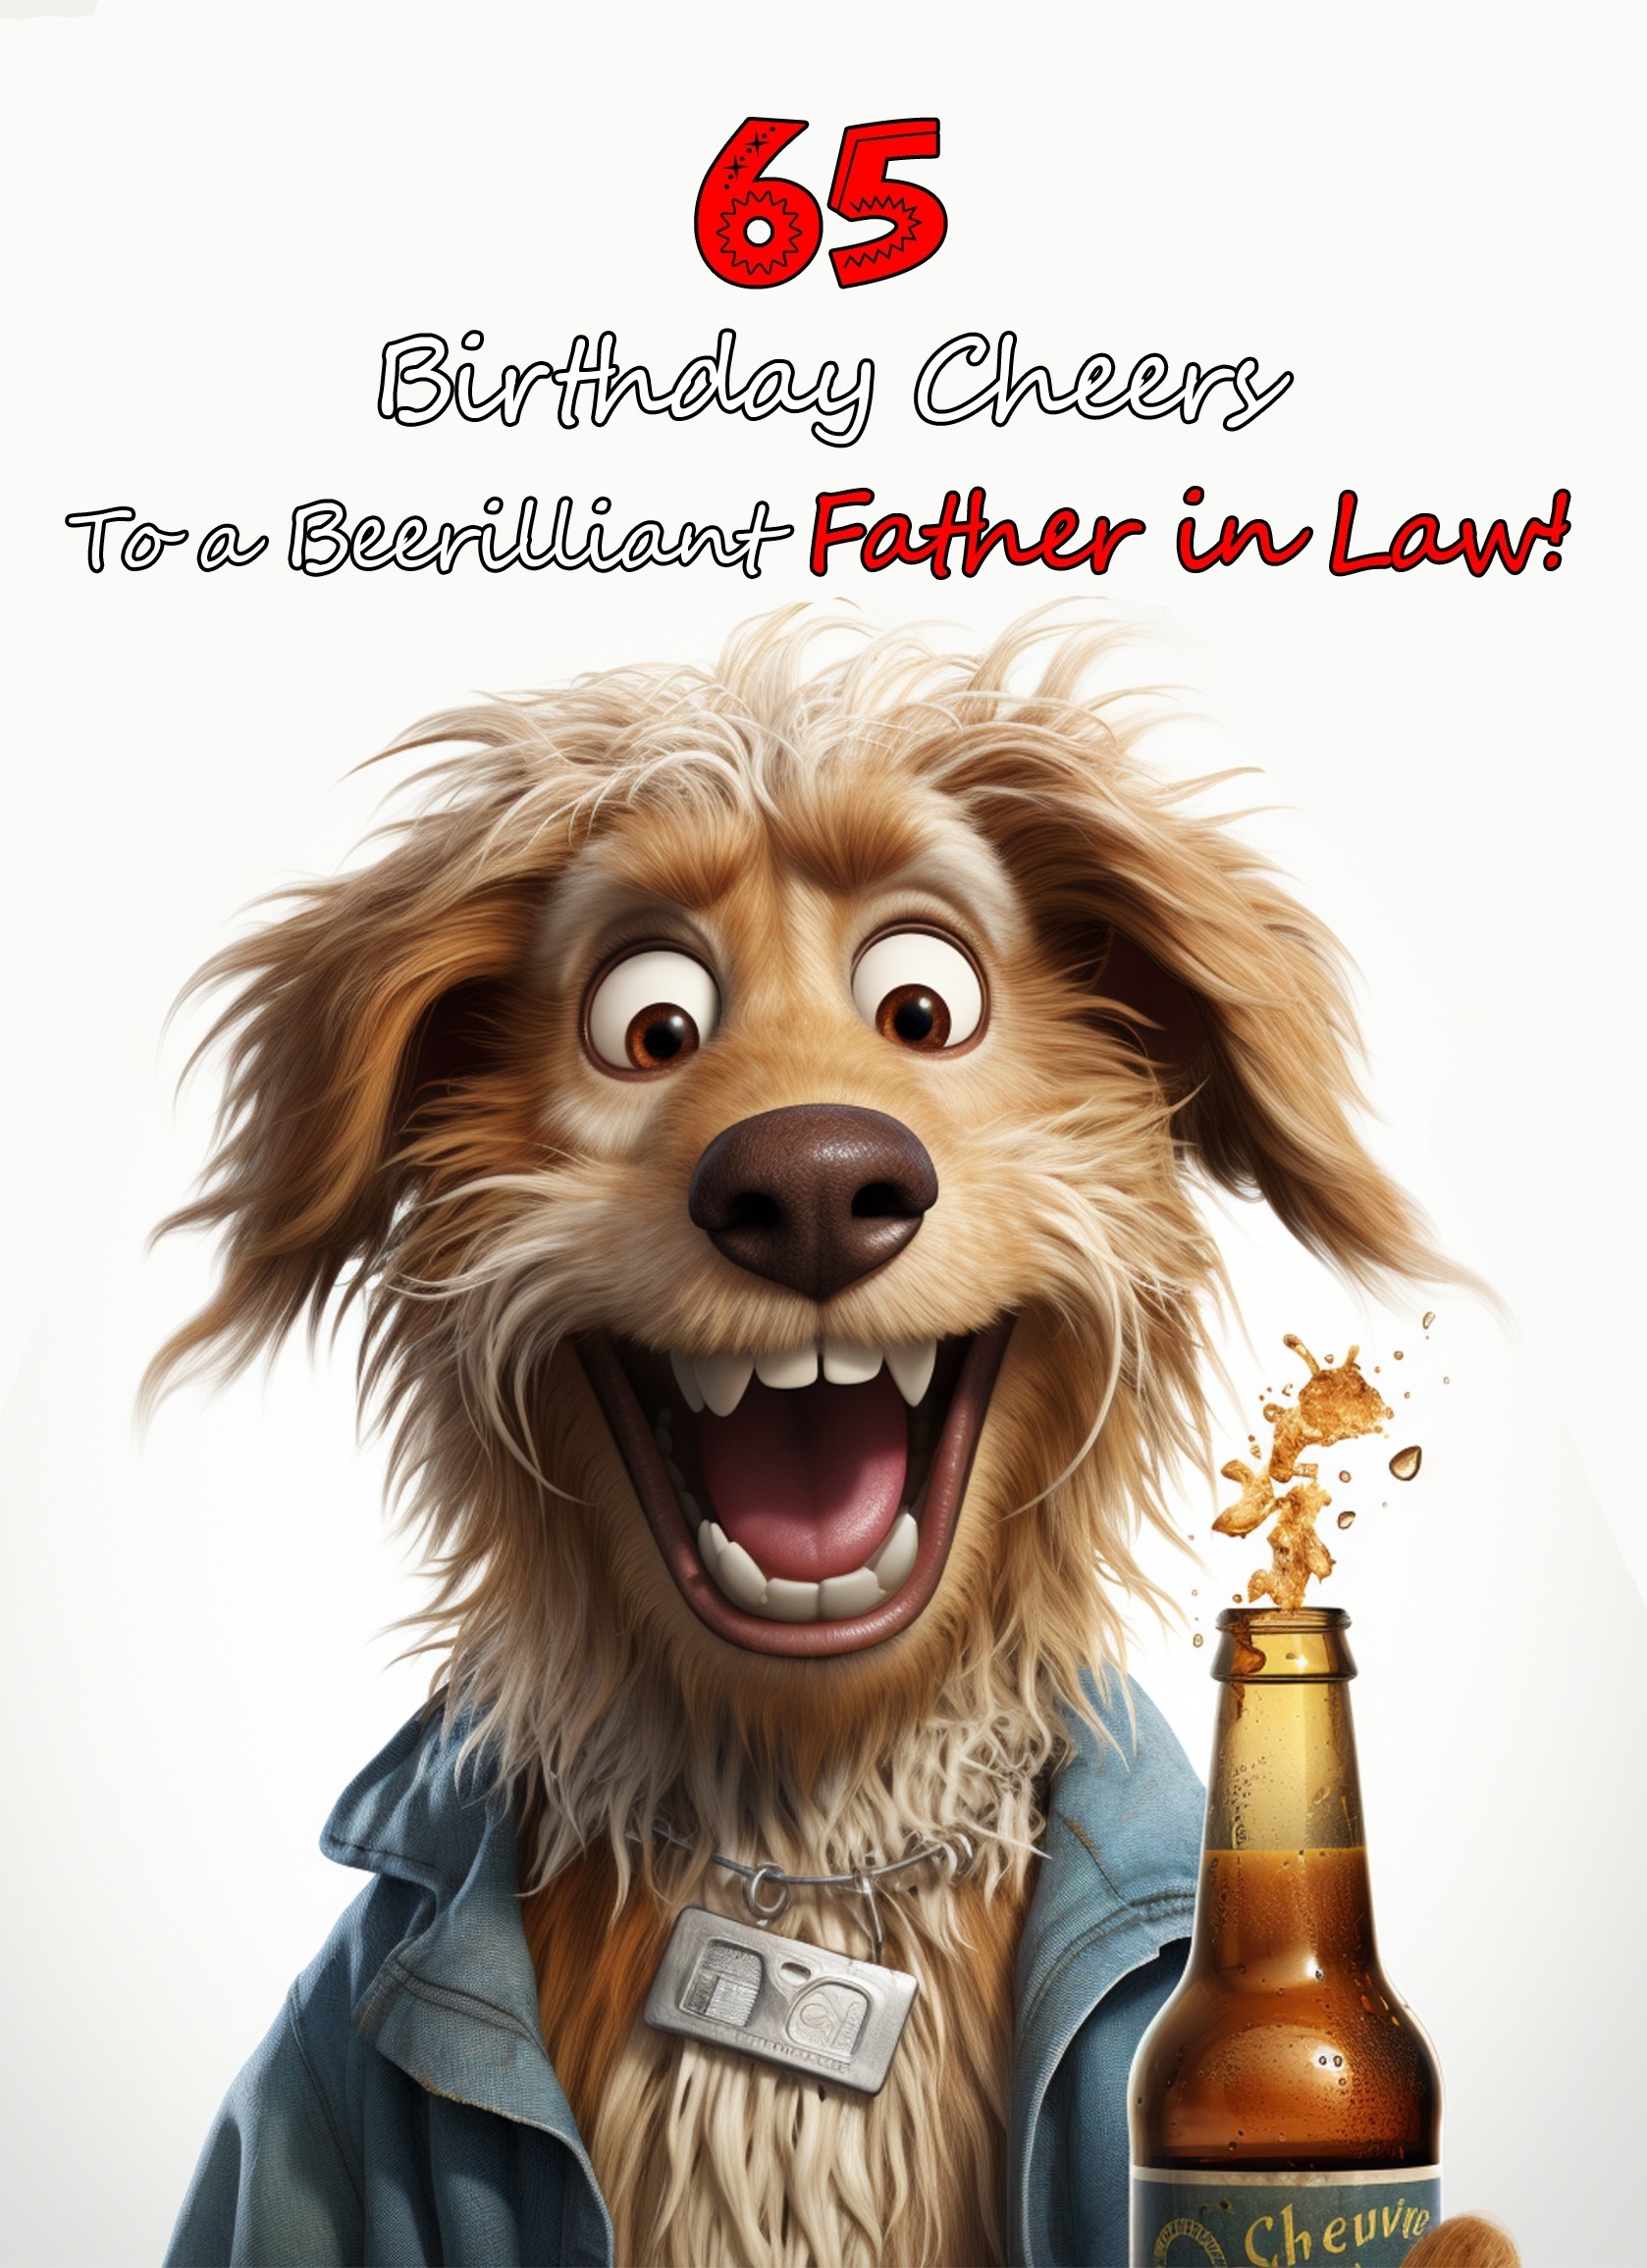 Father in Law 65th Birthday Card (Funny Beerilliant Birthday Cheers)